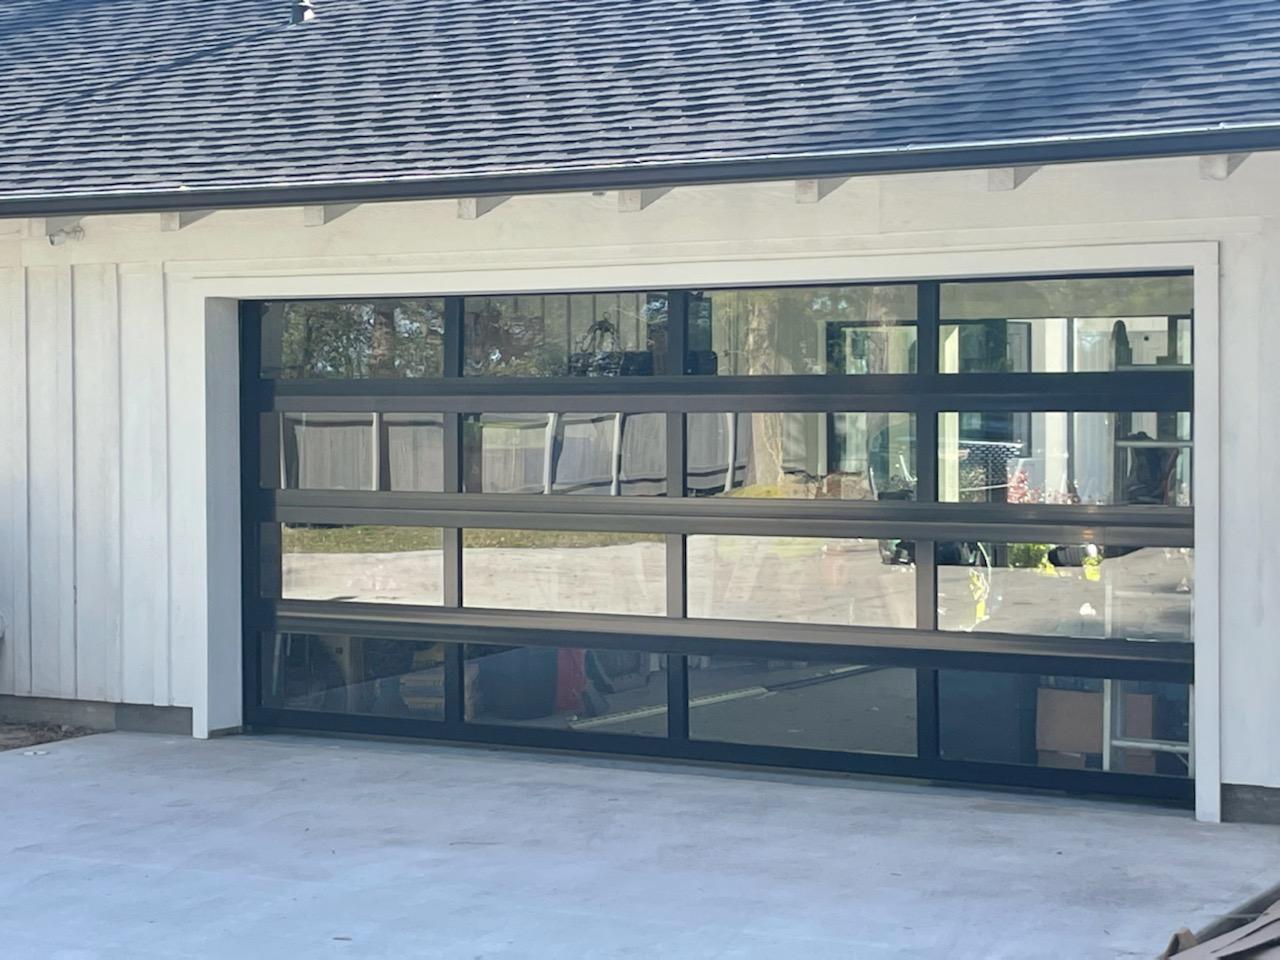 18 FT Wide By 7 FT Tall Full View Garage Door Matt Black Finish With Clear Glass